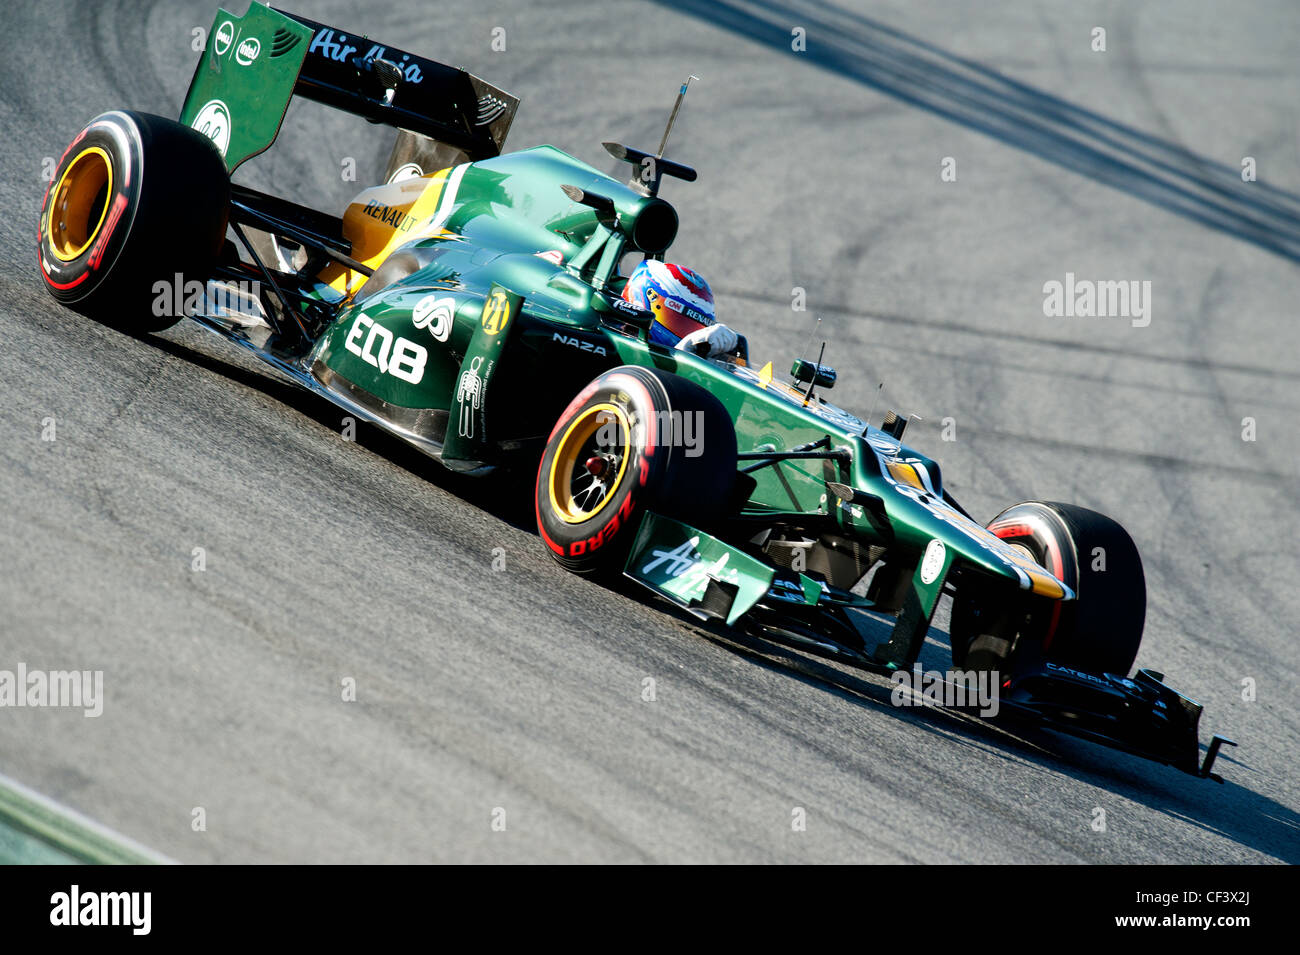 Vitaly Petrov (RUS), Caterham F1 Team-Renault CT-01, racecar during Formula 1 testing sessions near Barcelona in February 2012. Stock Photo